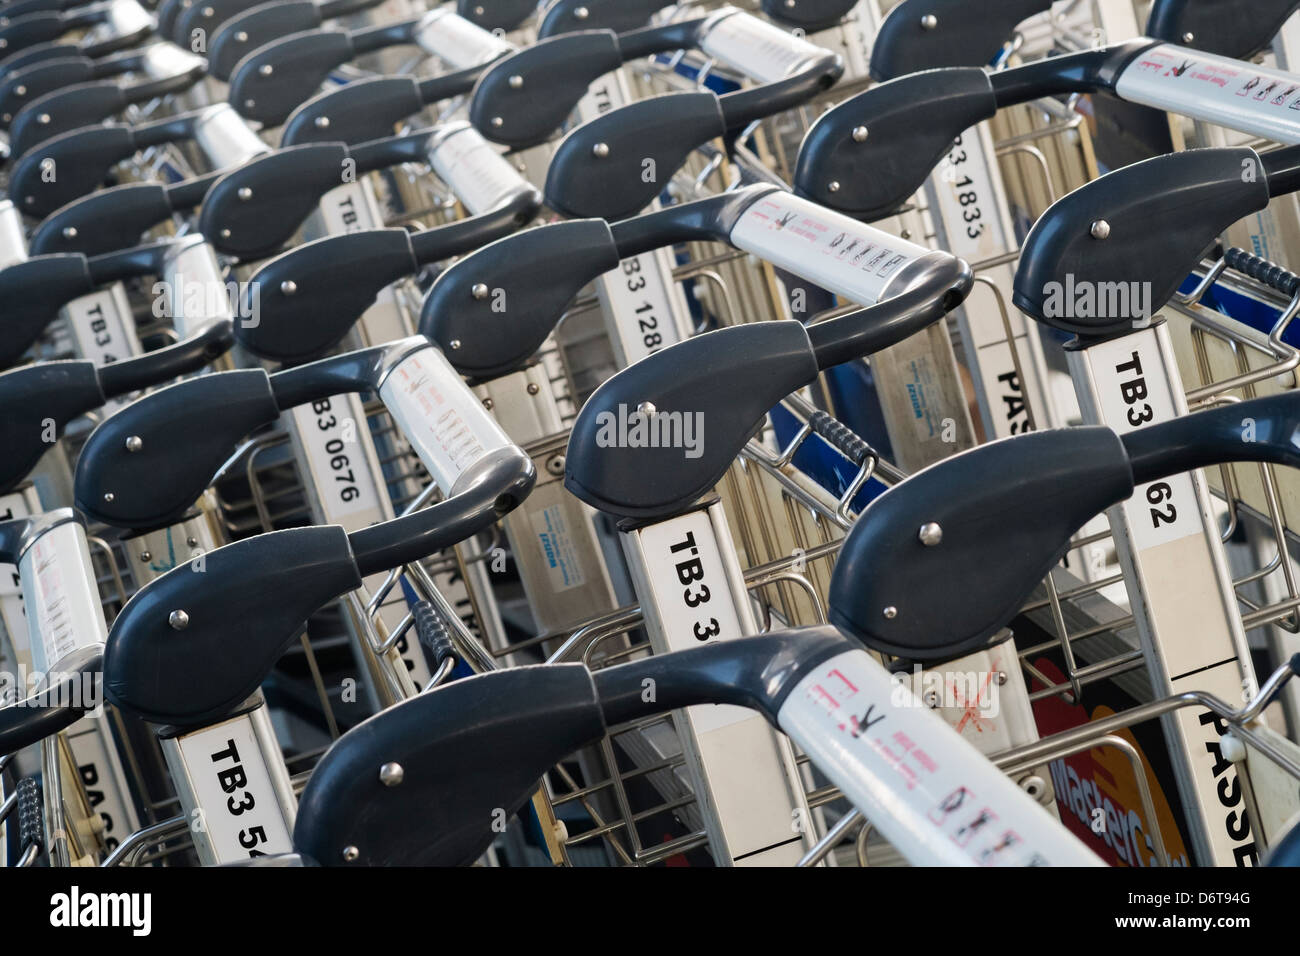 Many luggage carts lined up at an airport Stock Photo